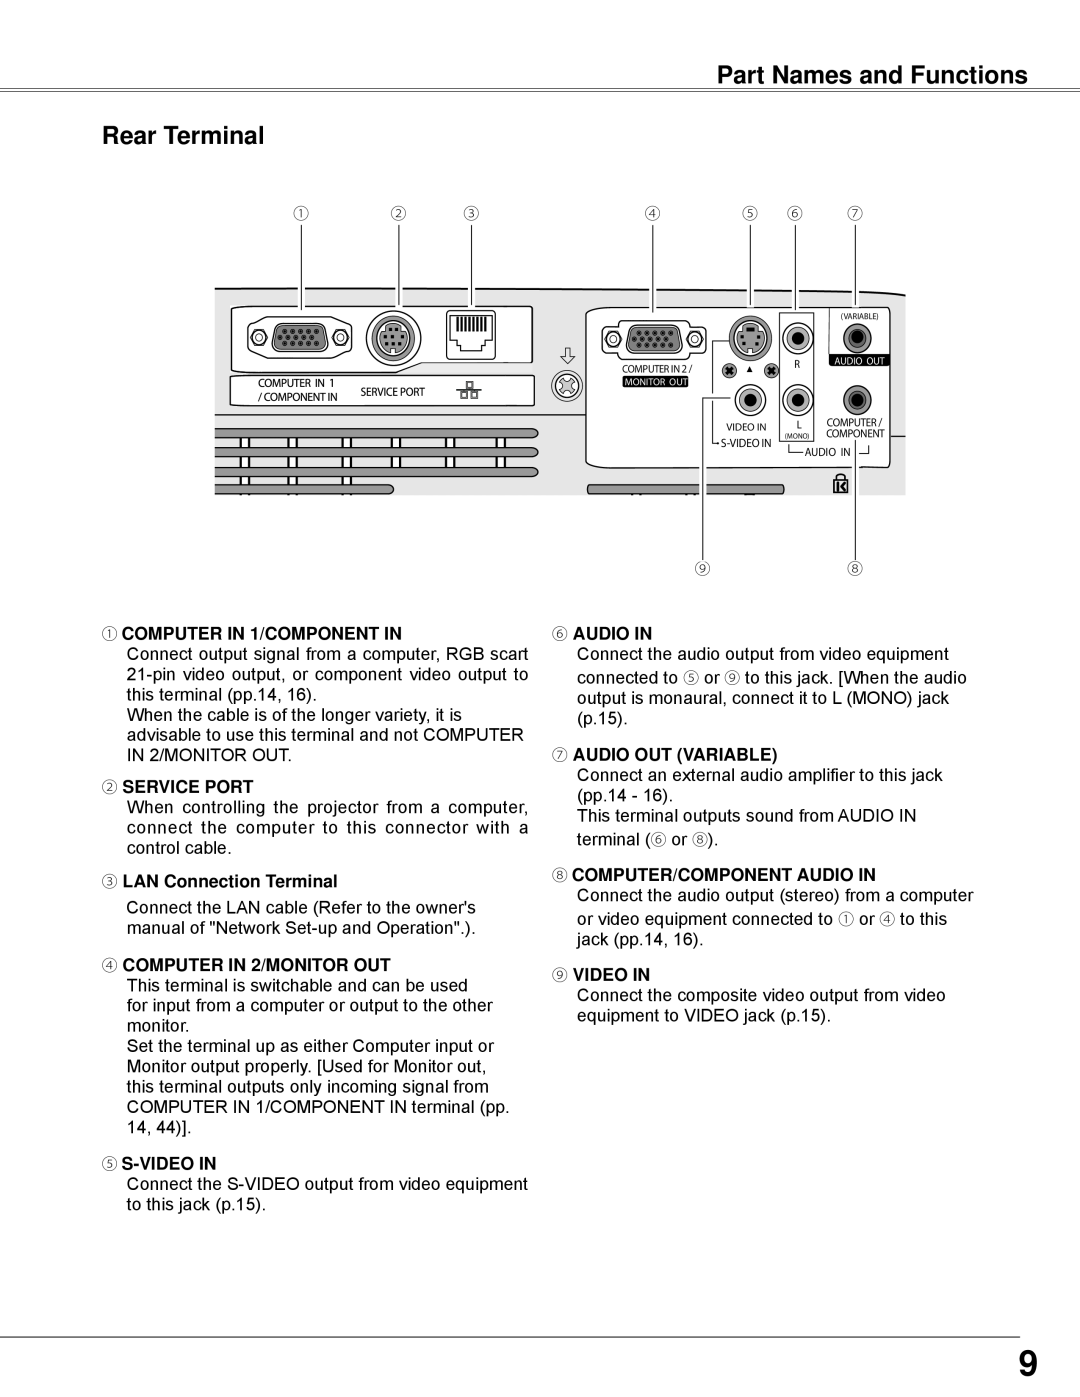 Sanyo PLC-WXE45 Part Names and Functions Rear Terminal, ①COMPUTER IN 1/COMPONENT IN, ②SERVICE PORT, ⑤S-VIDEOIN, ⑥AUDIO IN 